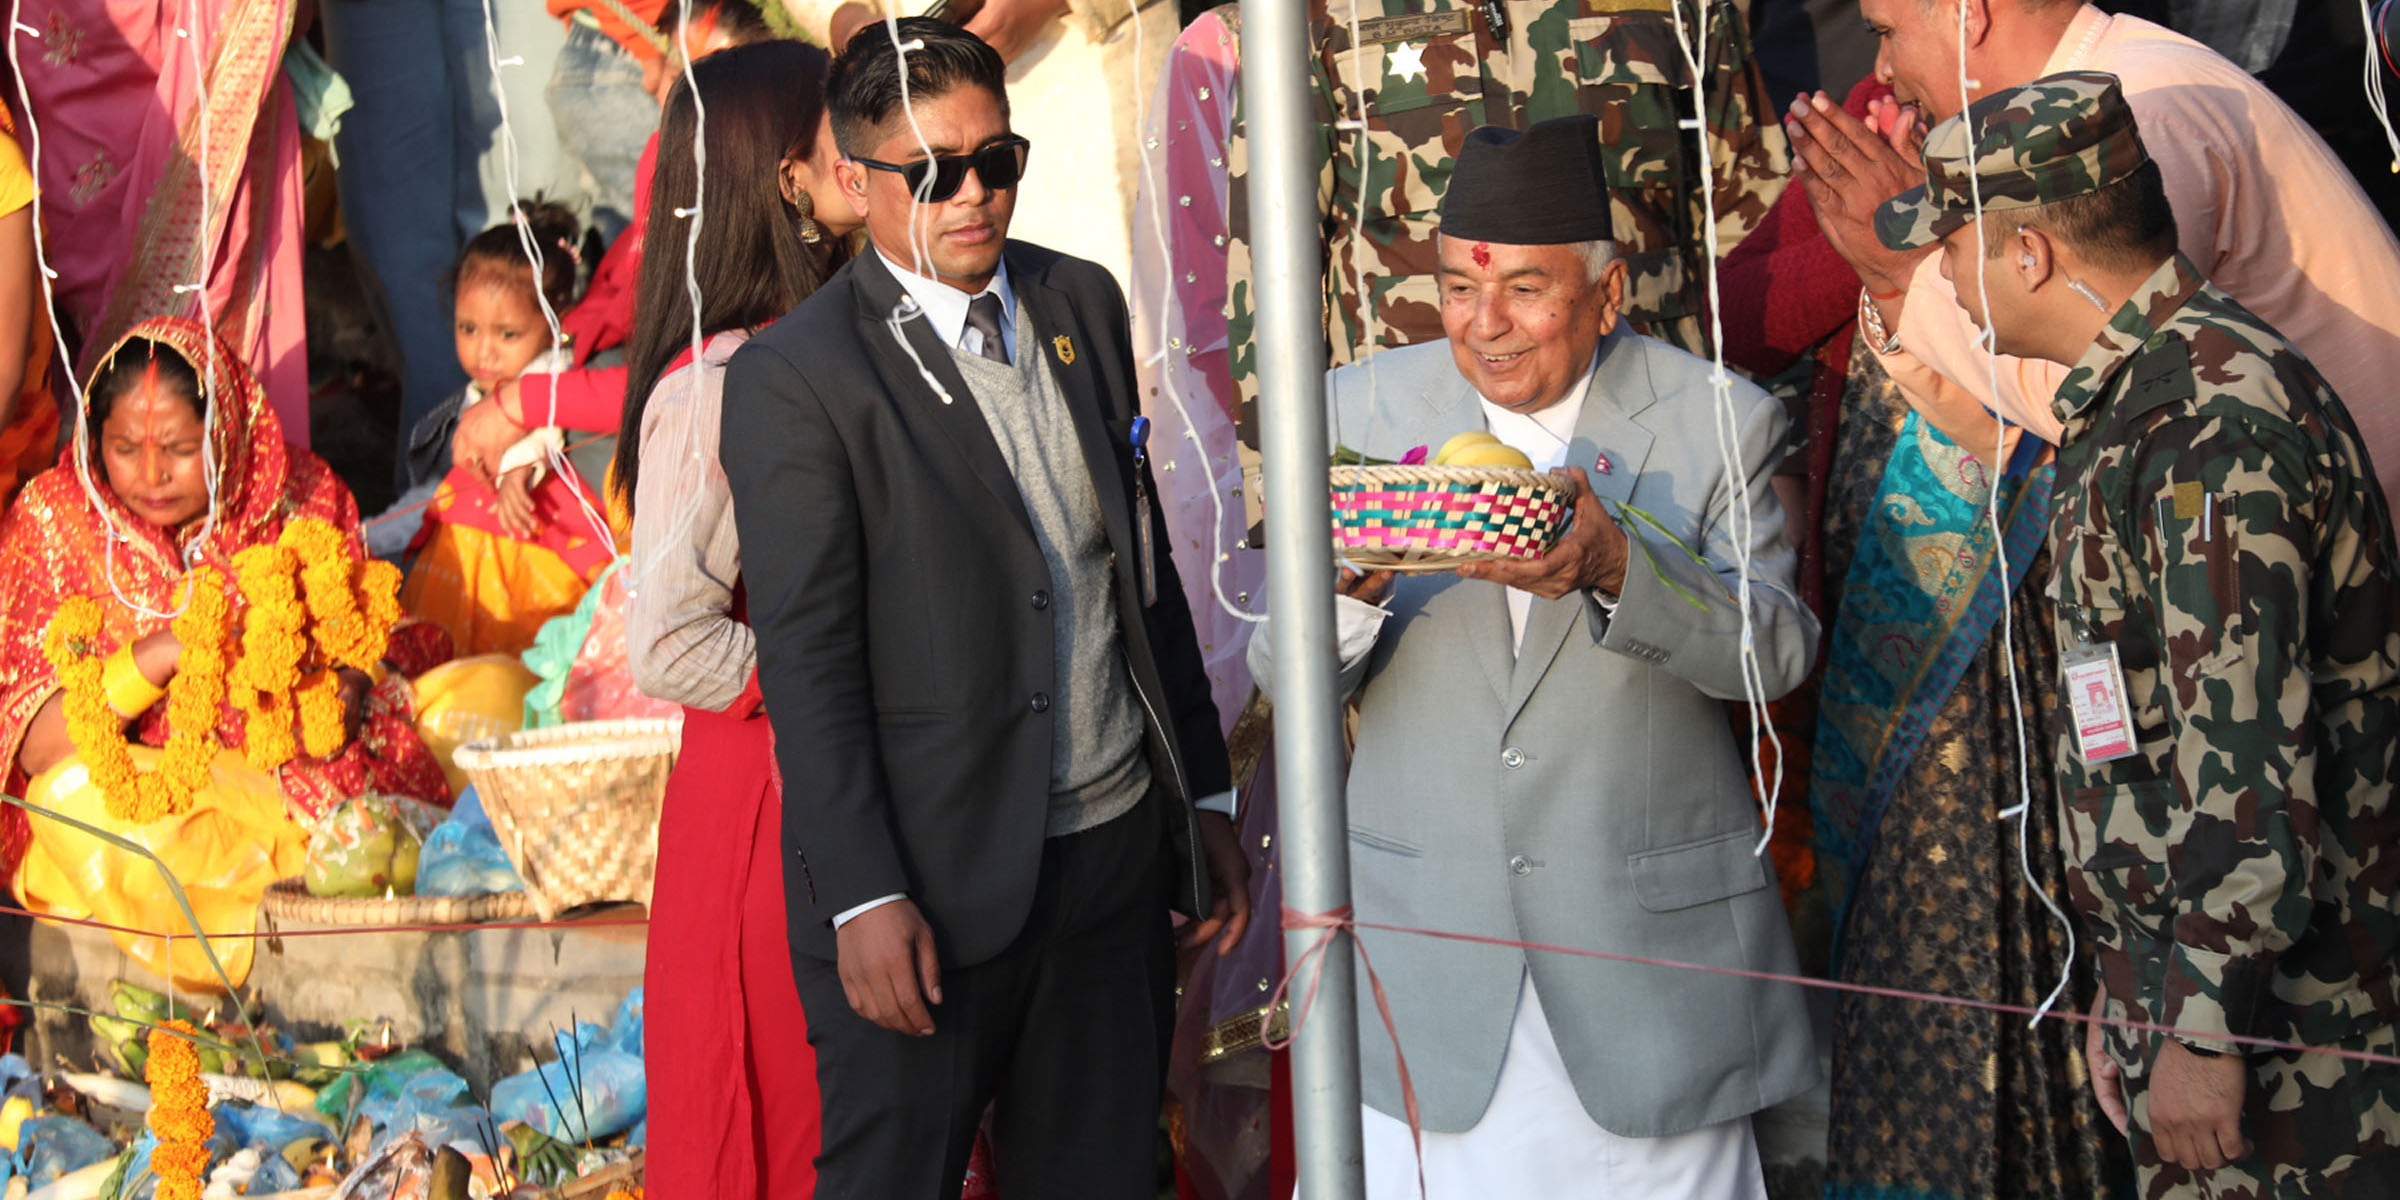 President, Vice President participate in Chhath festivities [In Pictures]